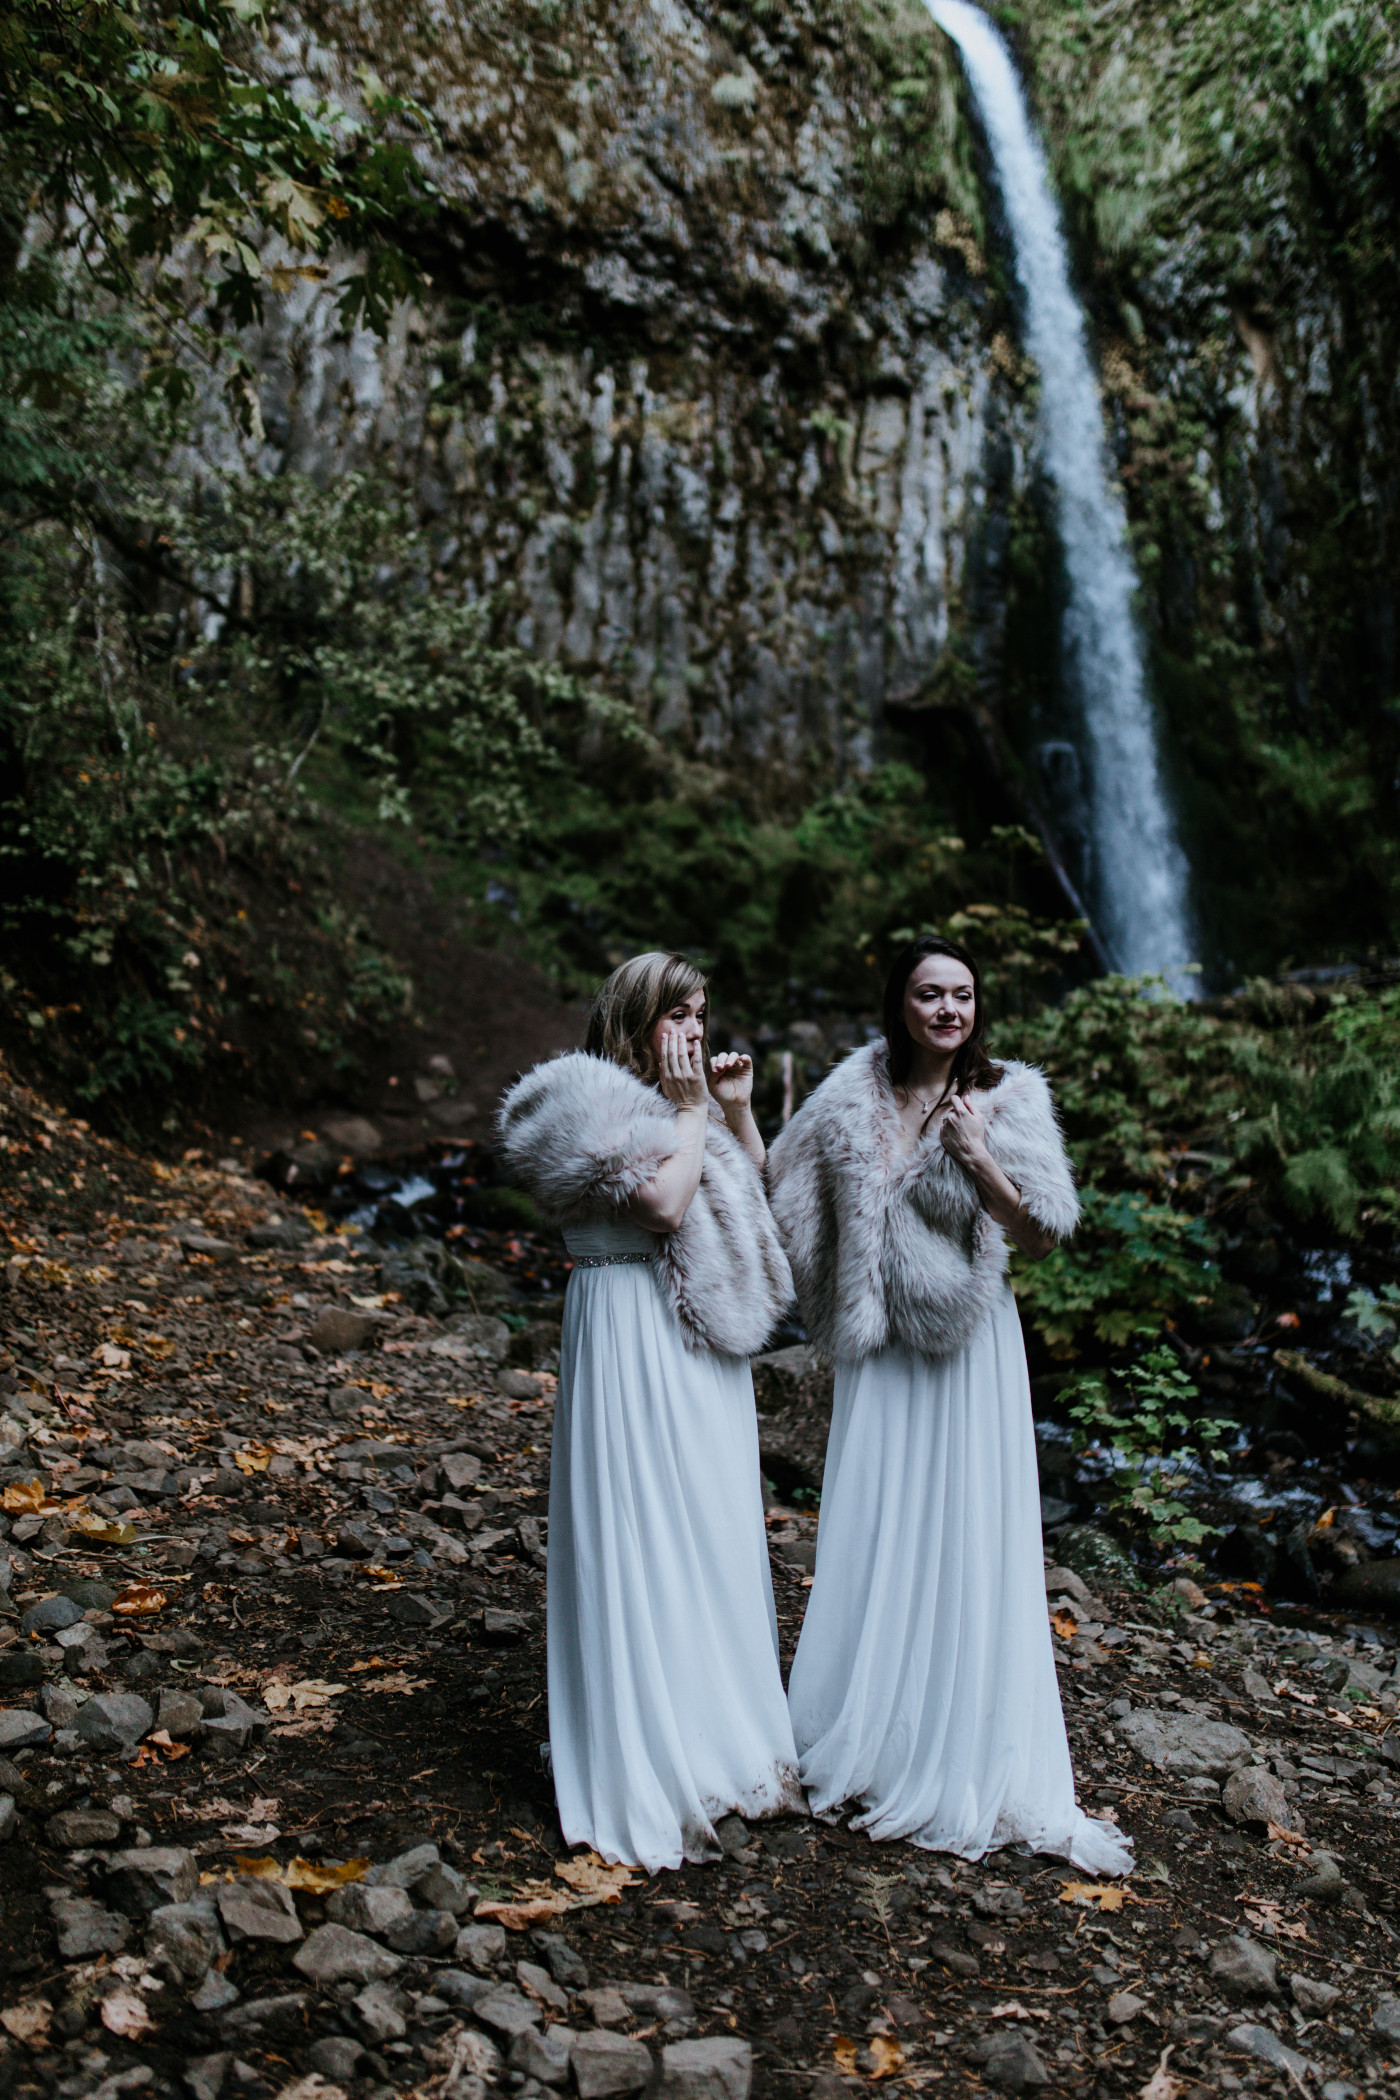 Hayley and Tiffany face their family and friends. Elopement photography at the Columbia River Gorge by Sienna Plus Josh.